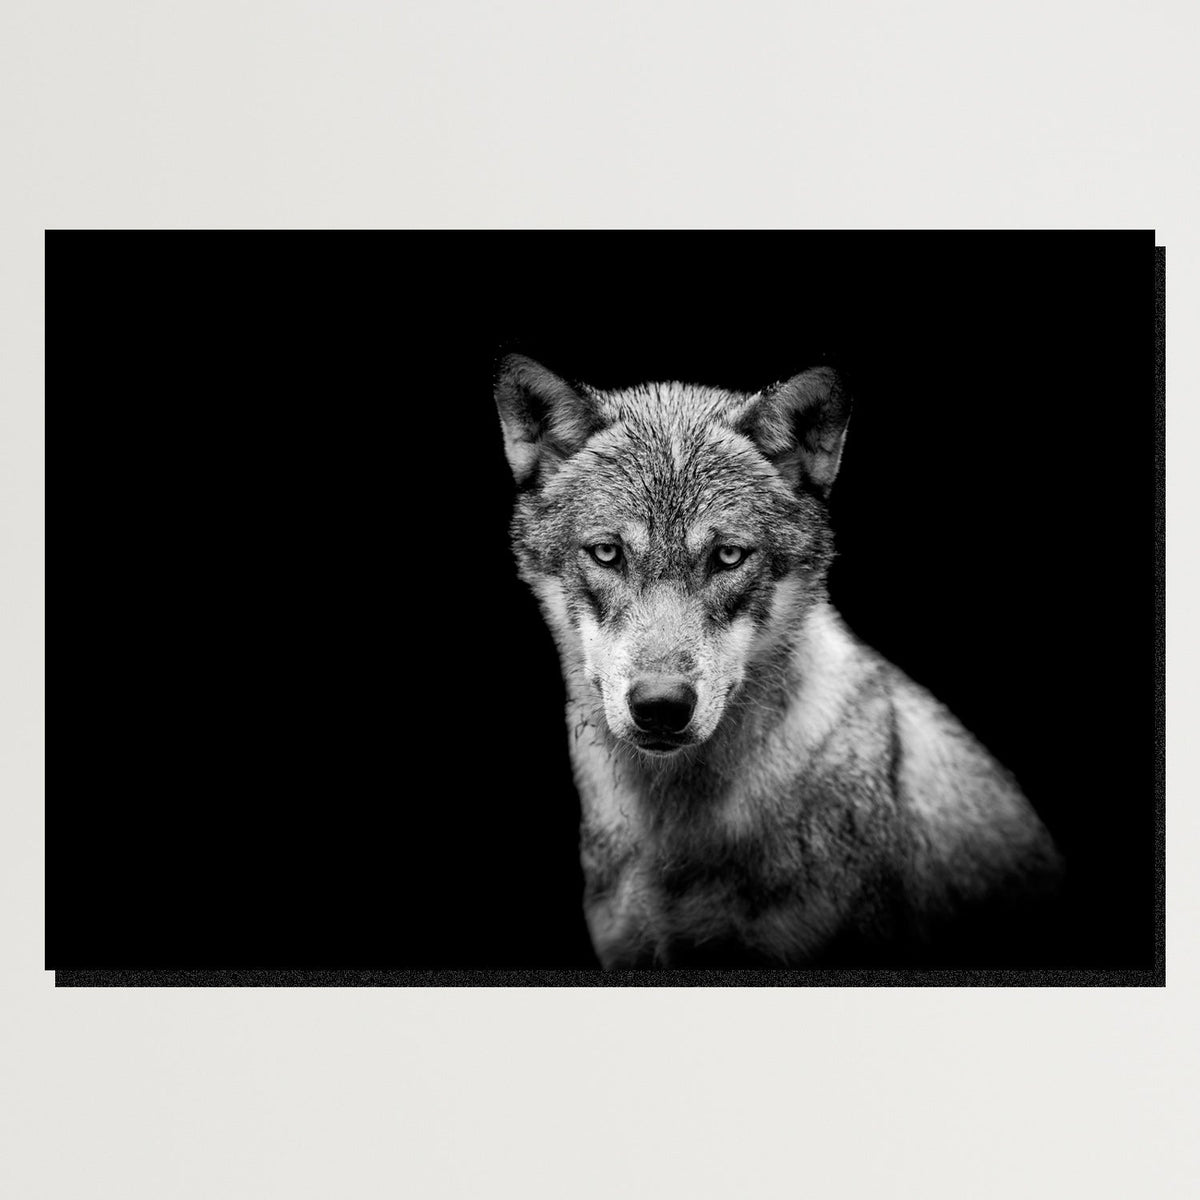 https://cdn.shopify.com/s/files/1/0387/9986/8044/products/YoungWolfCanvasArtprintStretched-Plain.jpg